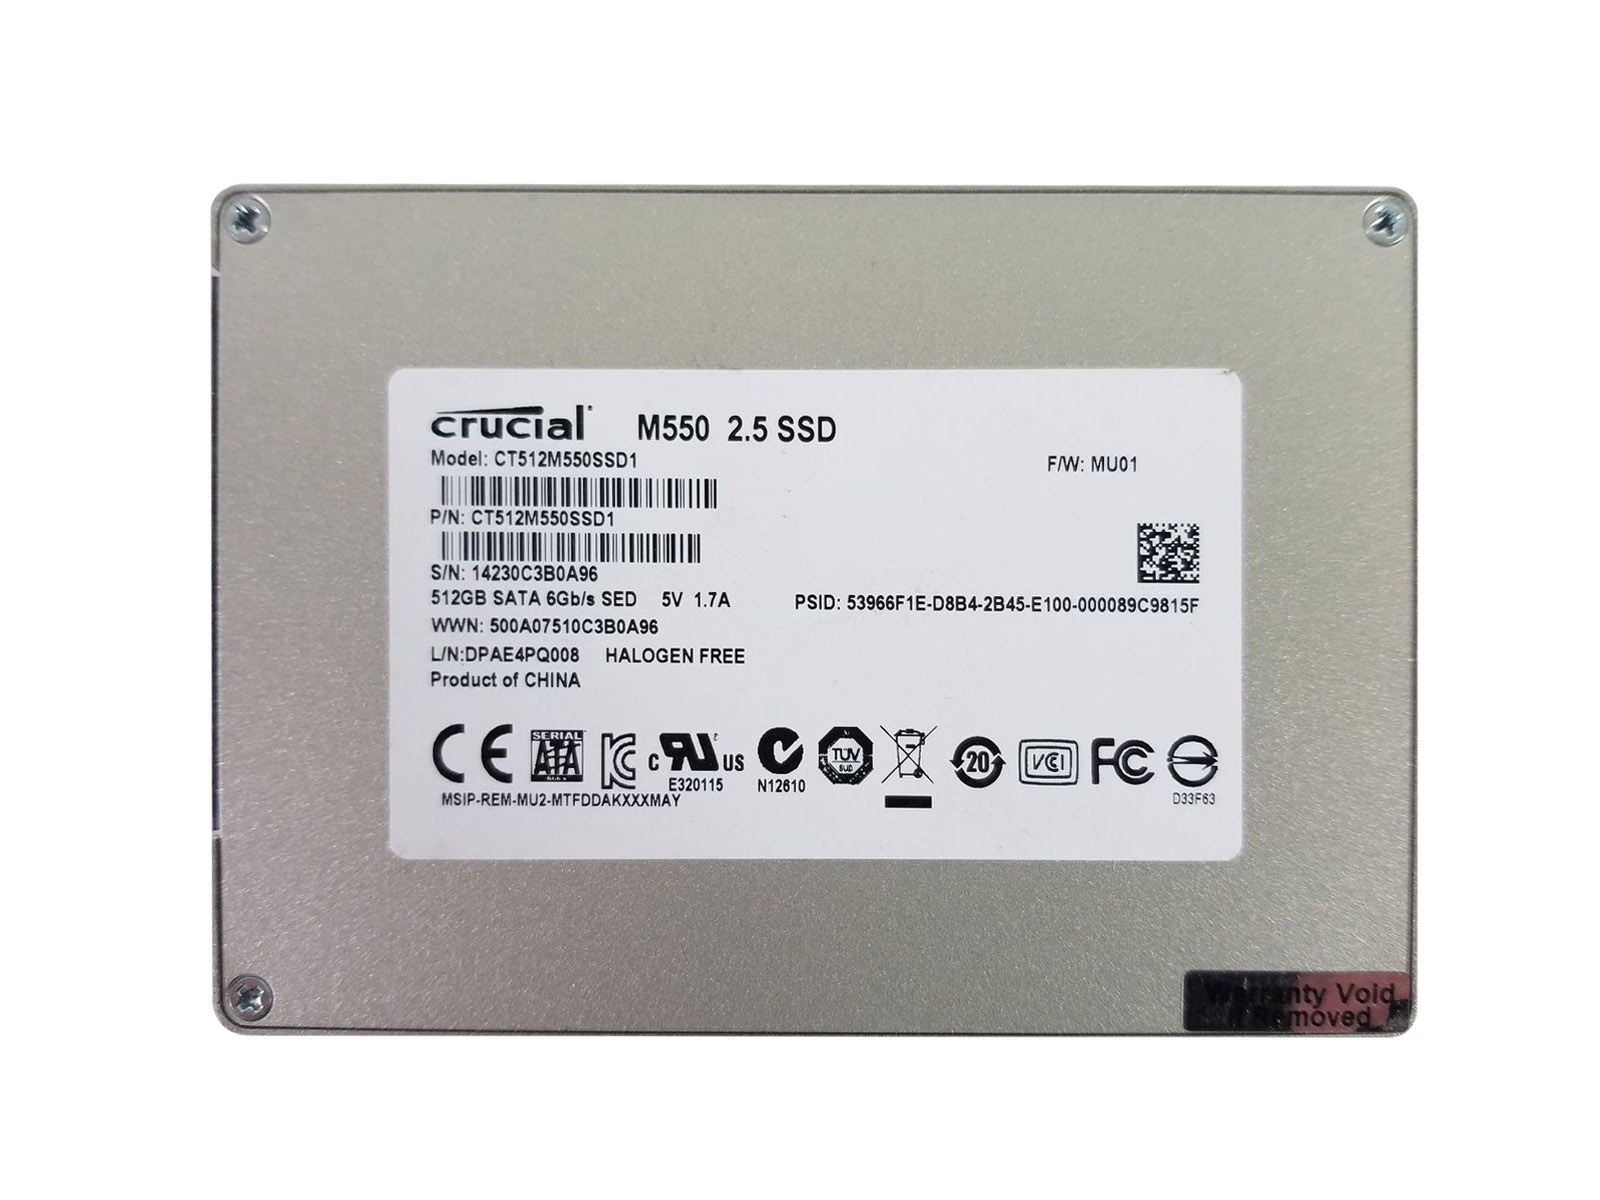 Crucial CT512M550SSD1 M550 512GB Multi-Level Cell SATA 6Gb/s 2.5-Inch Solid State Drive